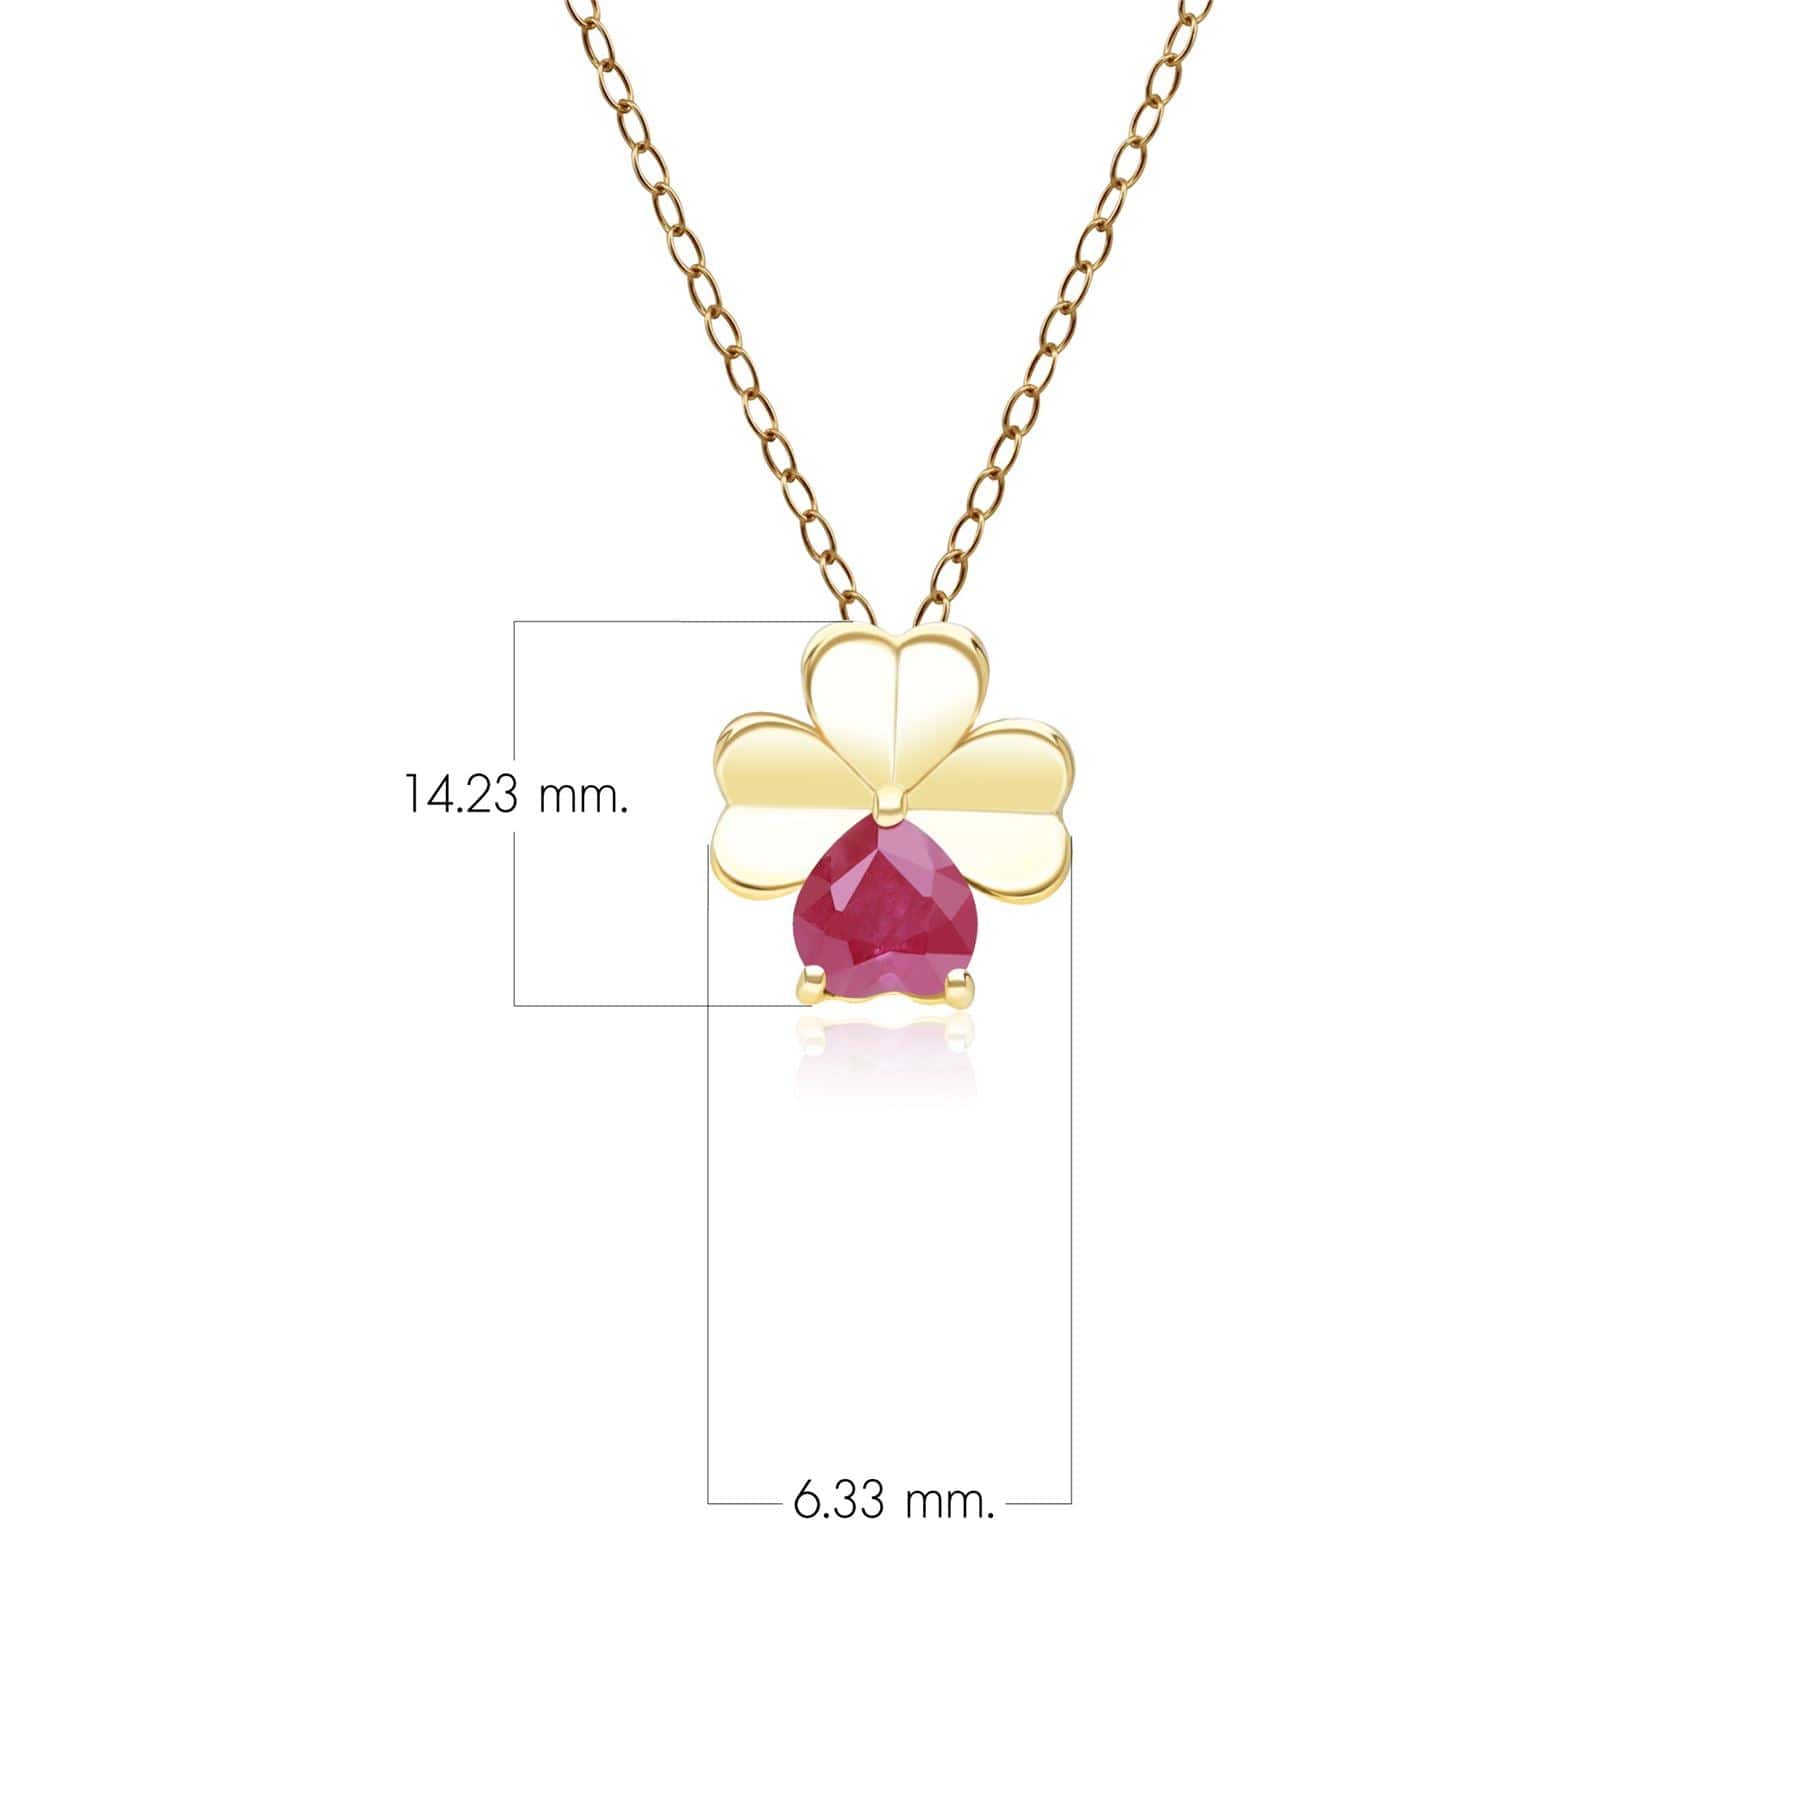 135P2126019 Gardenia Ruby Clover Pendant Necklace in 9ct Yellow Gold Dimensions